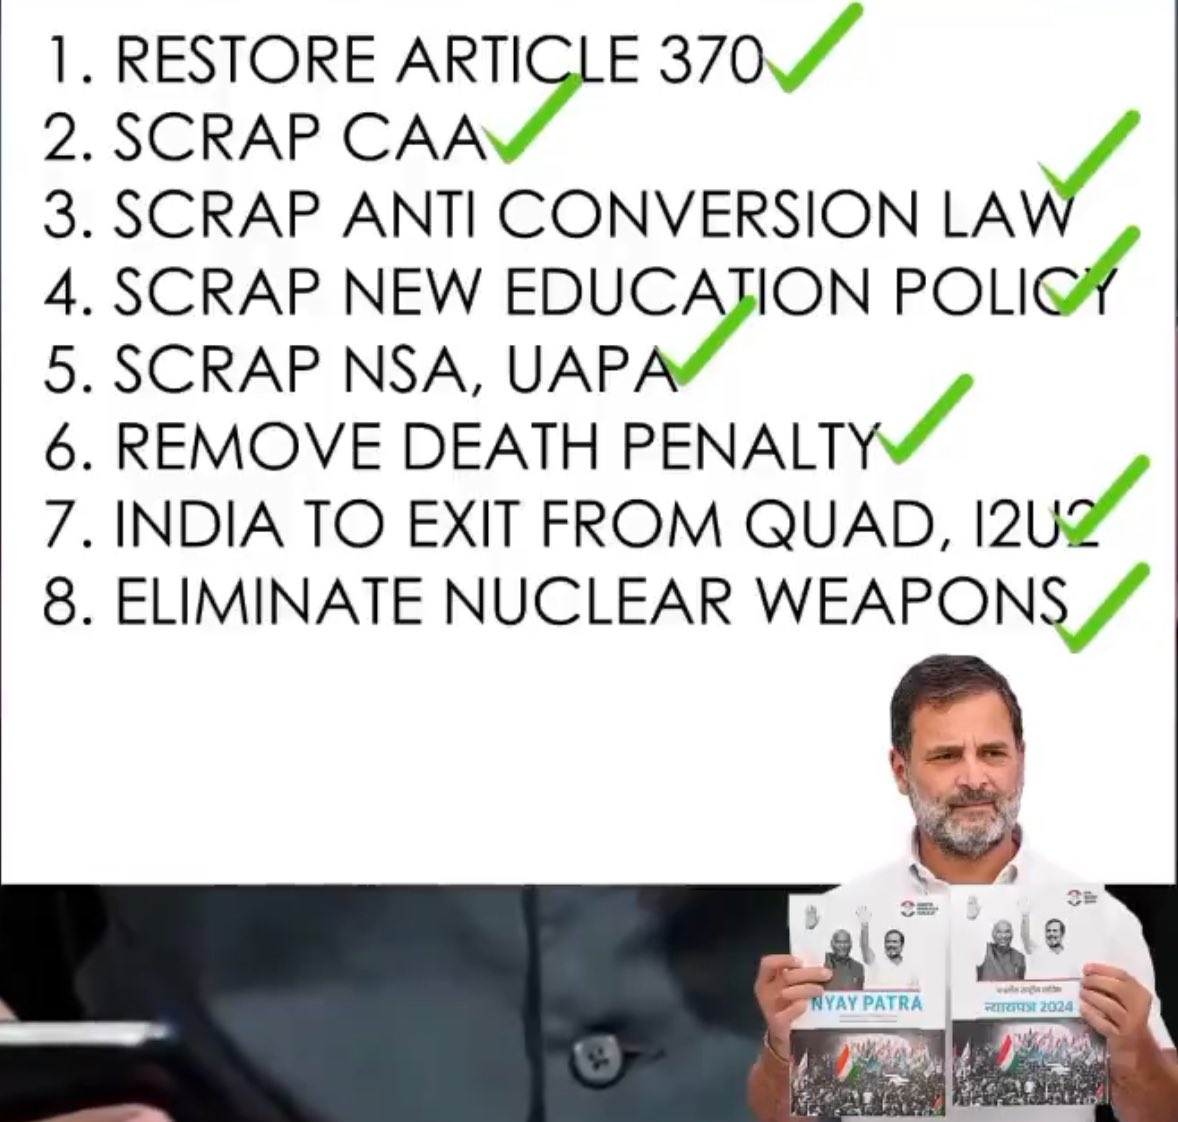 Will you vote for this Congress manifesto?

Yes this is their manifesto. Open your eyes. Read and understand what they are trying to do. Push the country another 60yrs backwards.

#Vote4Modi #EveryVoteMatters #EveryVoteCounts